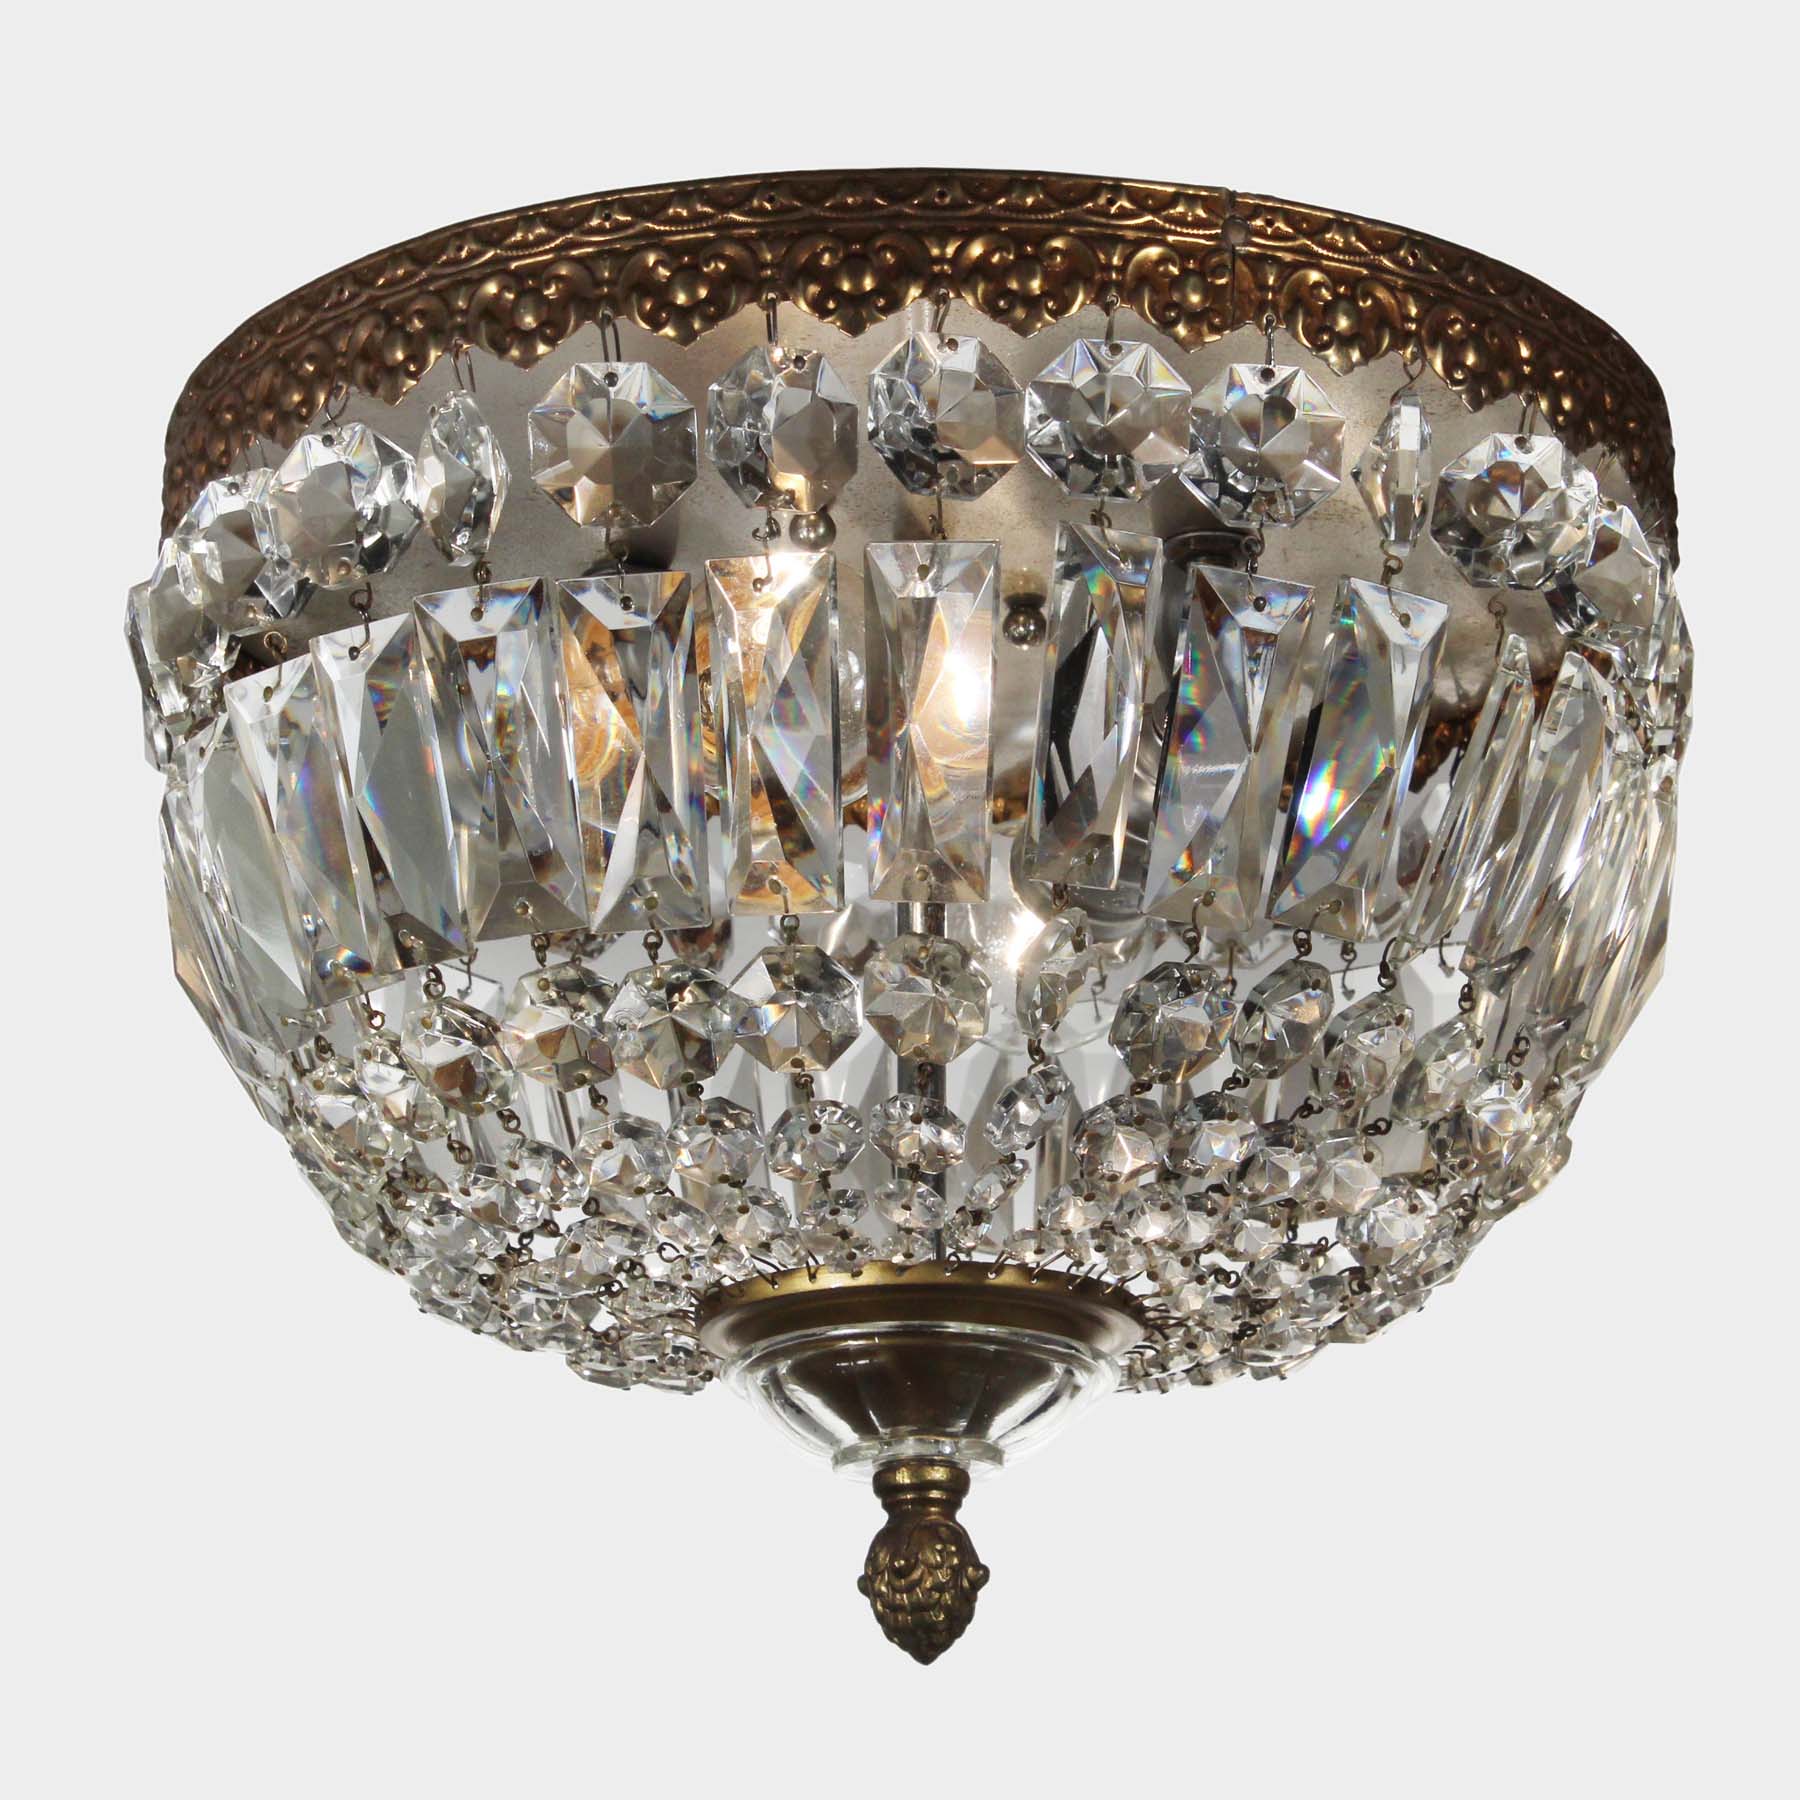 SOLD Antique Flush-Mount Beaded Basket Chandeliers with Prisms-69780